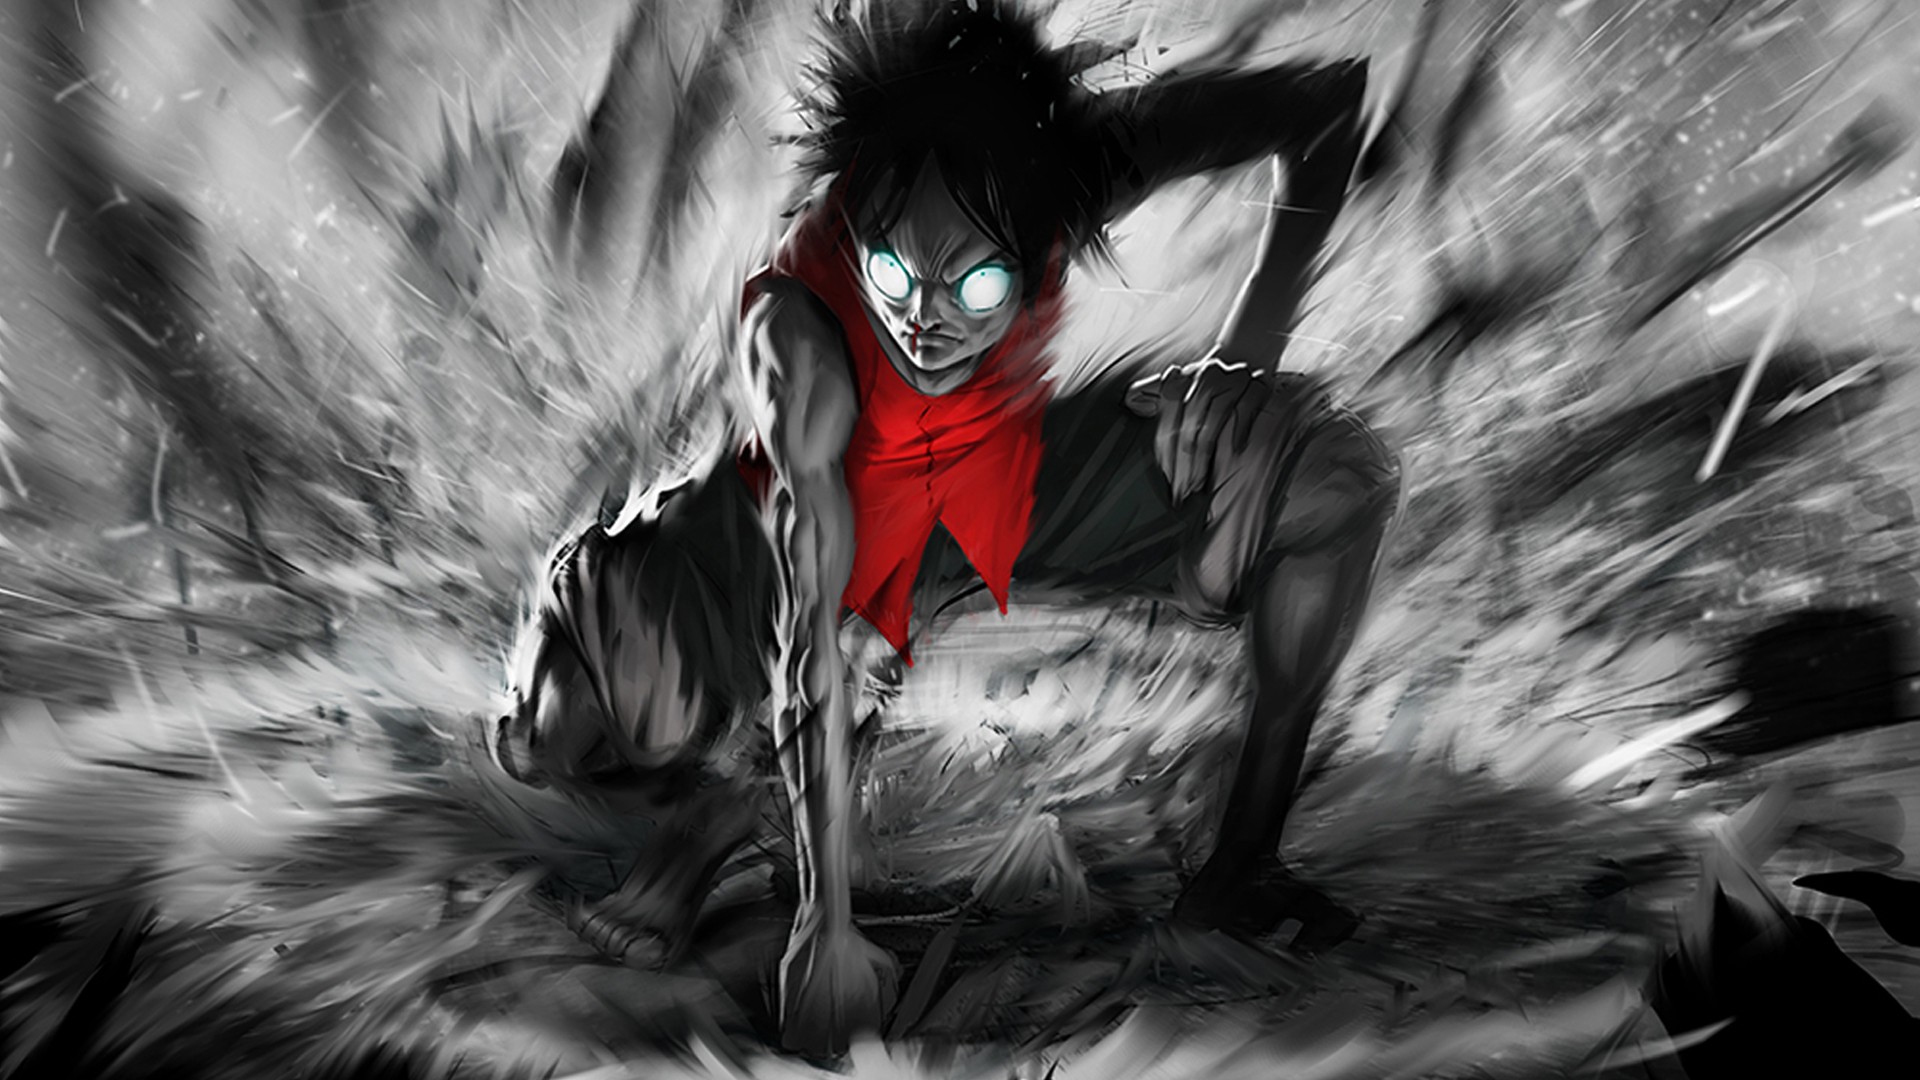 Anime 1920x1080 anime One Piece Monkey D. Luffy anime boys selective coloring glowing eyes